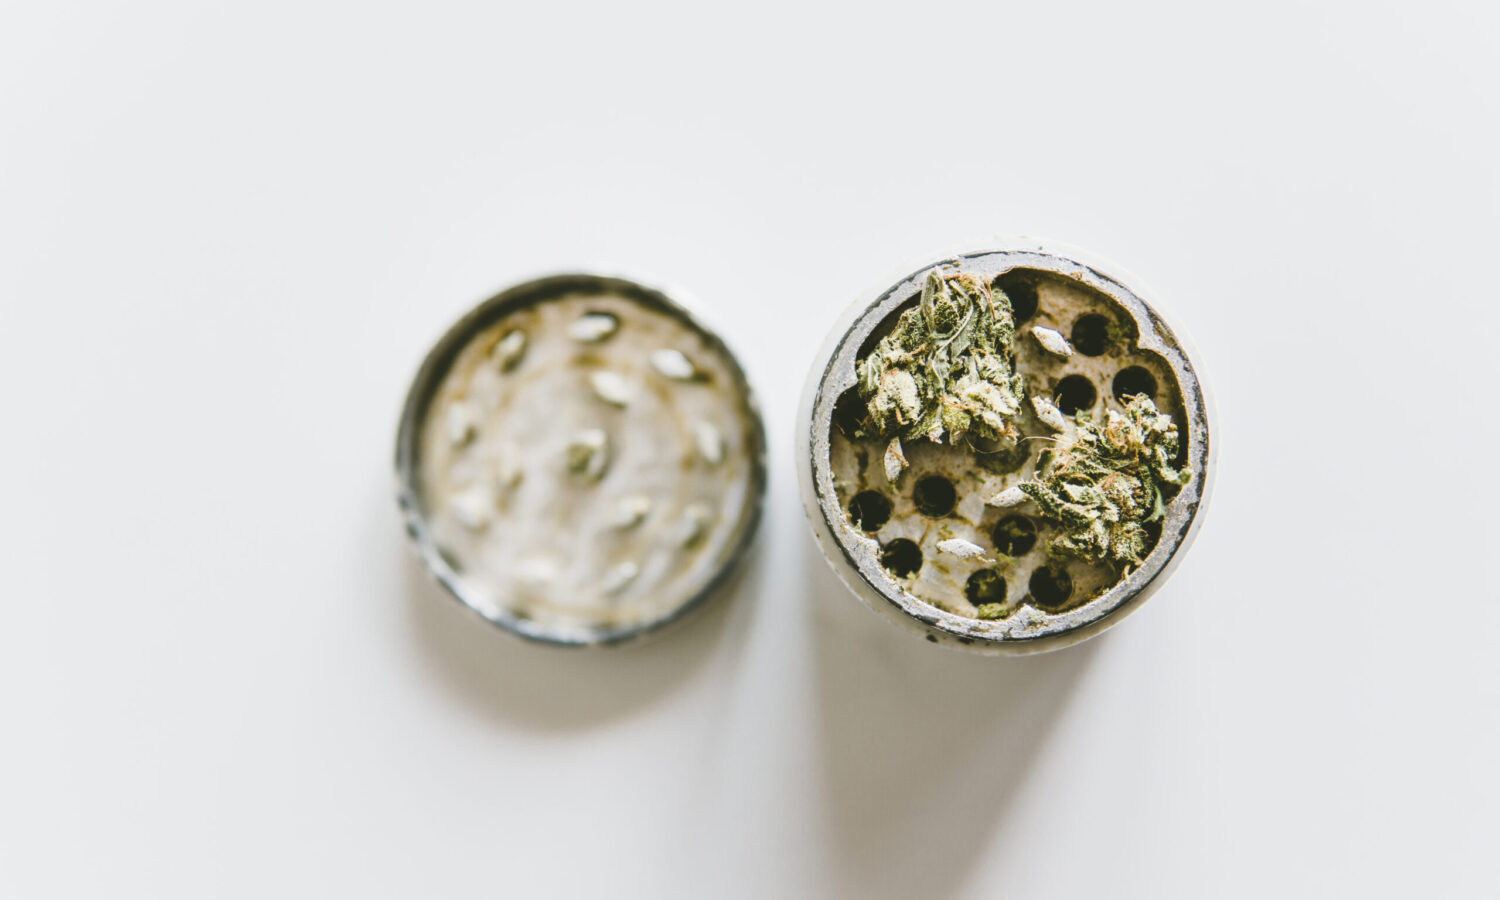 How To Clean Your Grinder